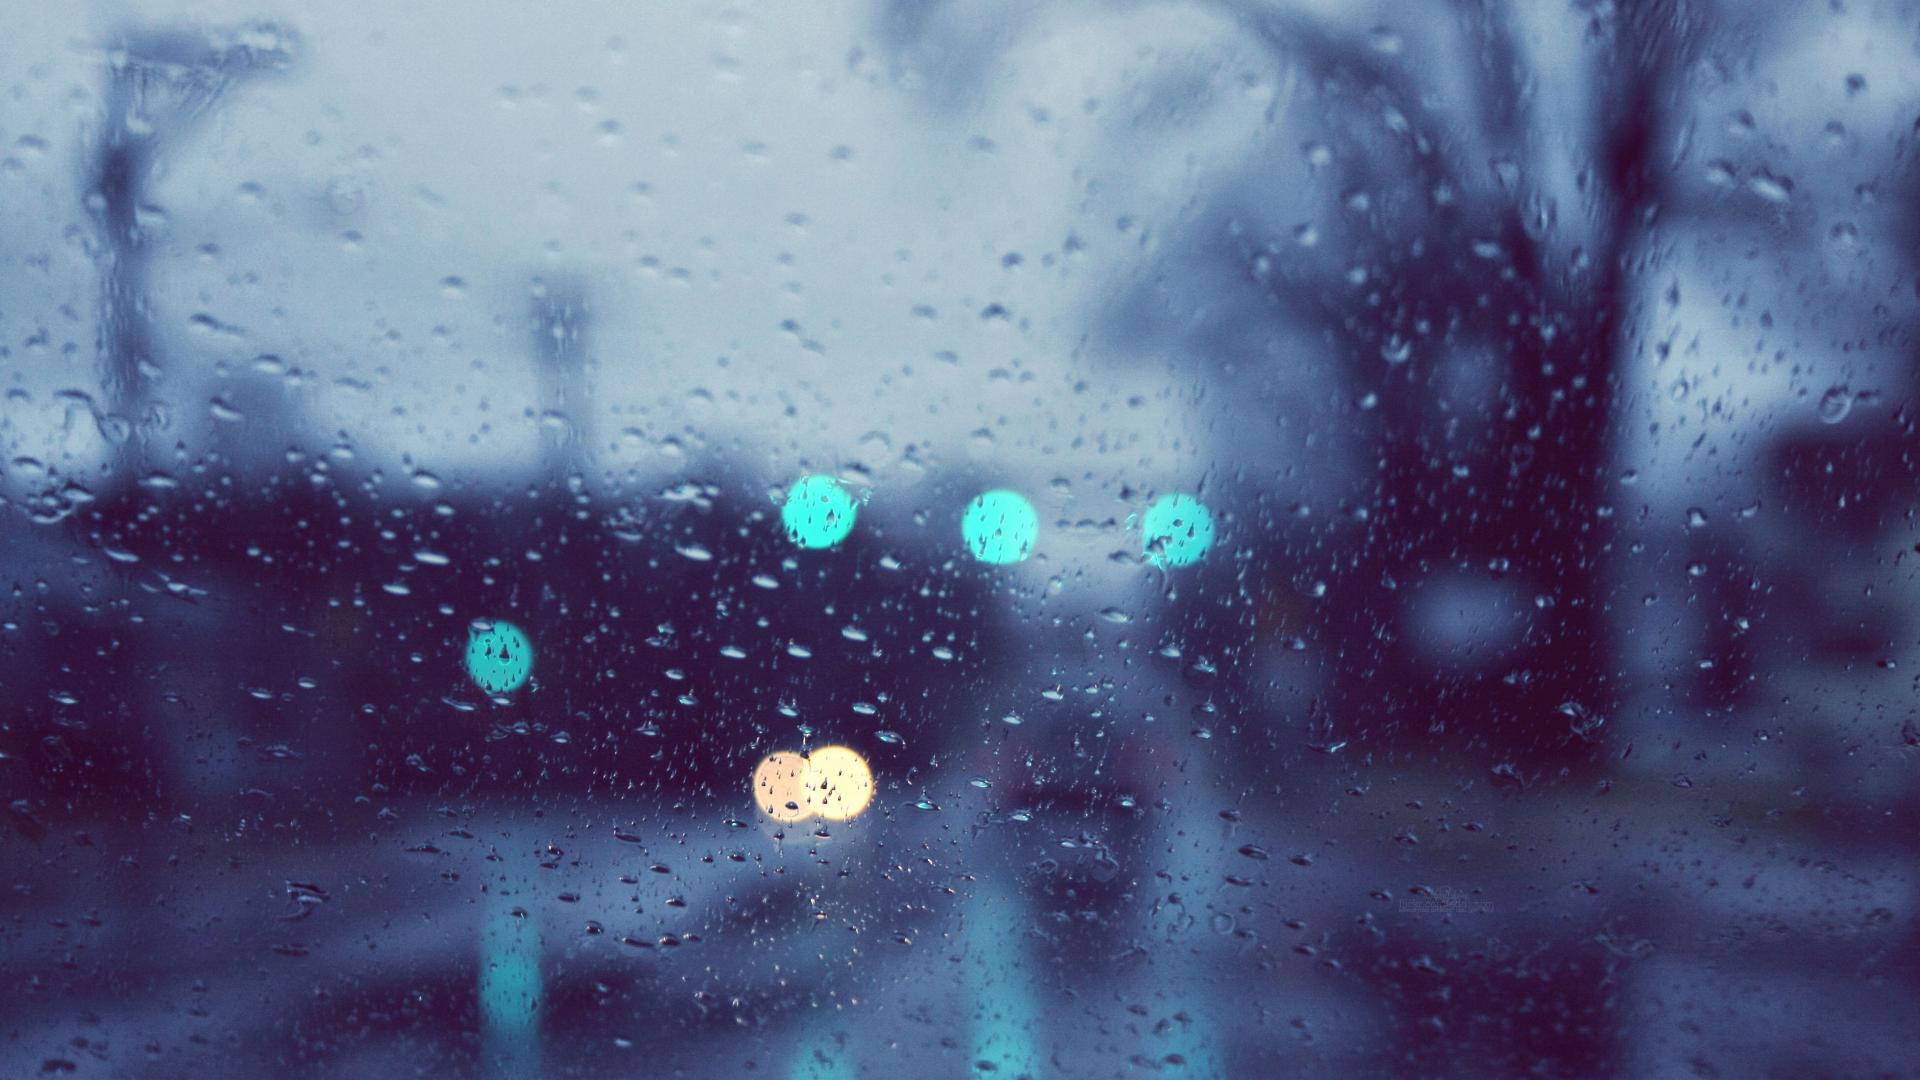 Rain HD Wallpapers For Desktop One HD Wallpaper Pictures Backgrounds